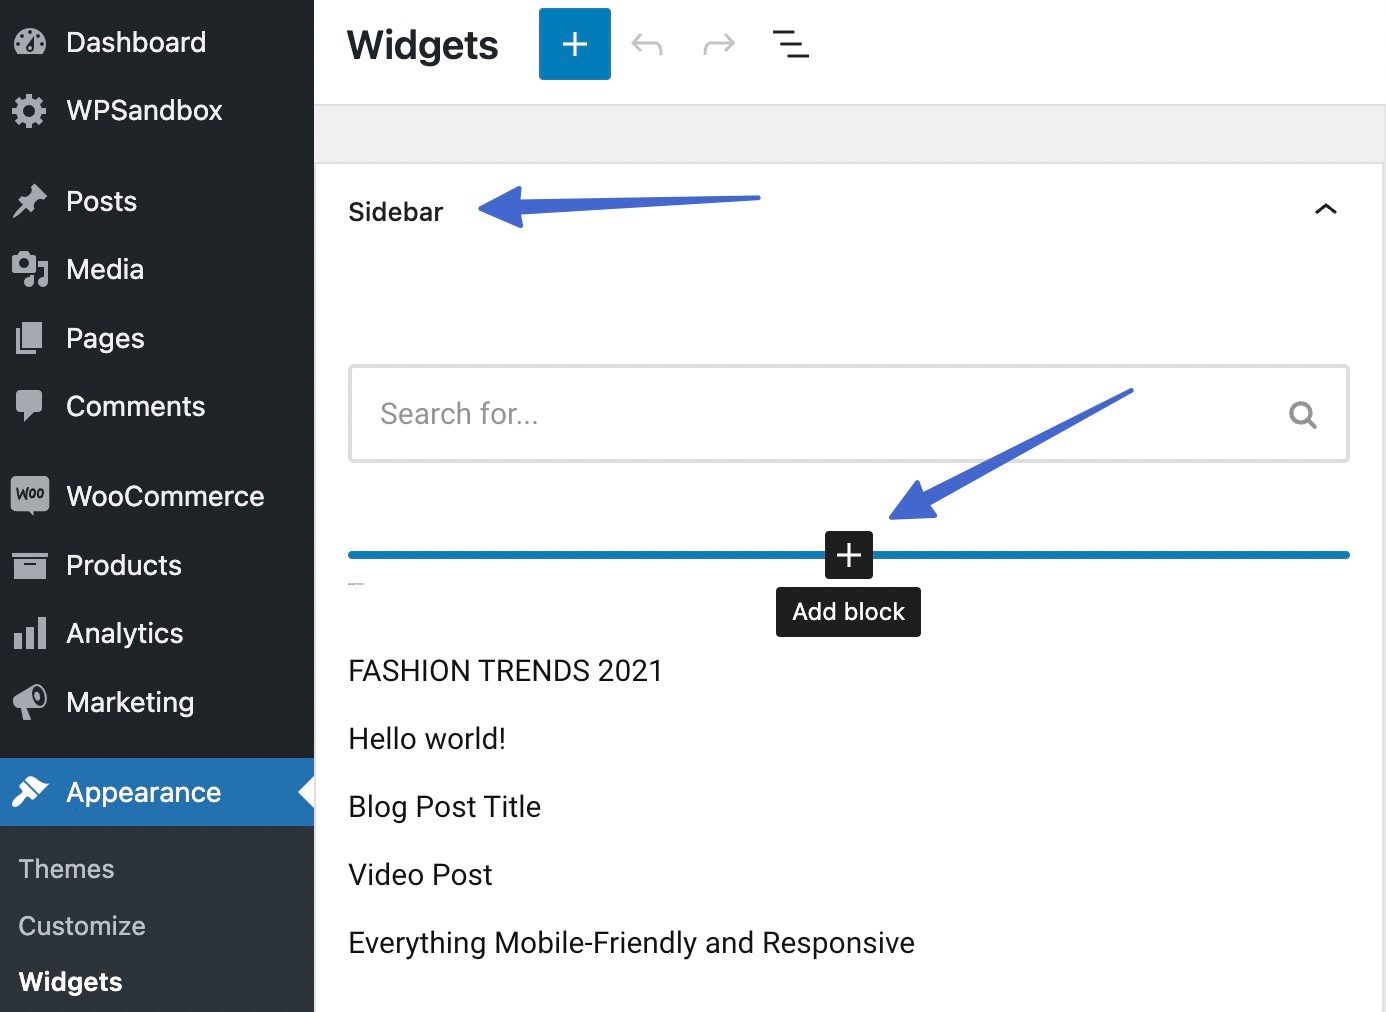 add a block in the widget to add WooCommerce featured products